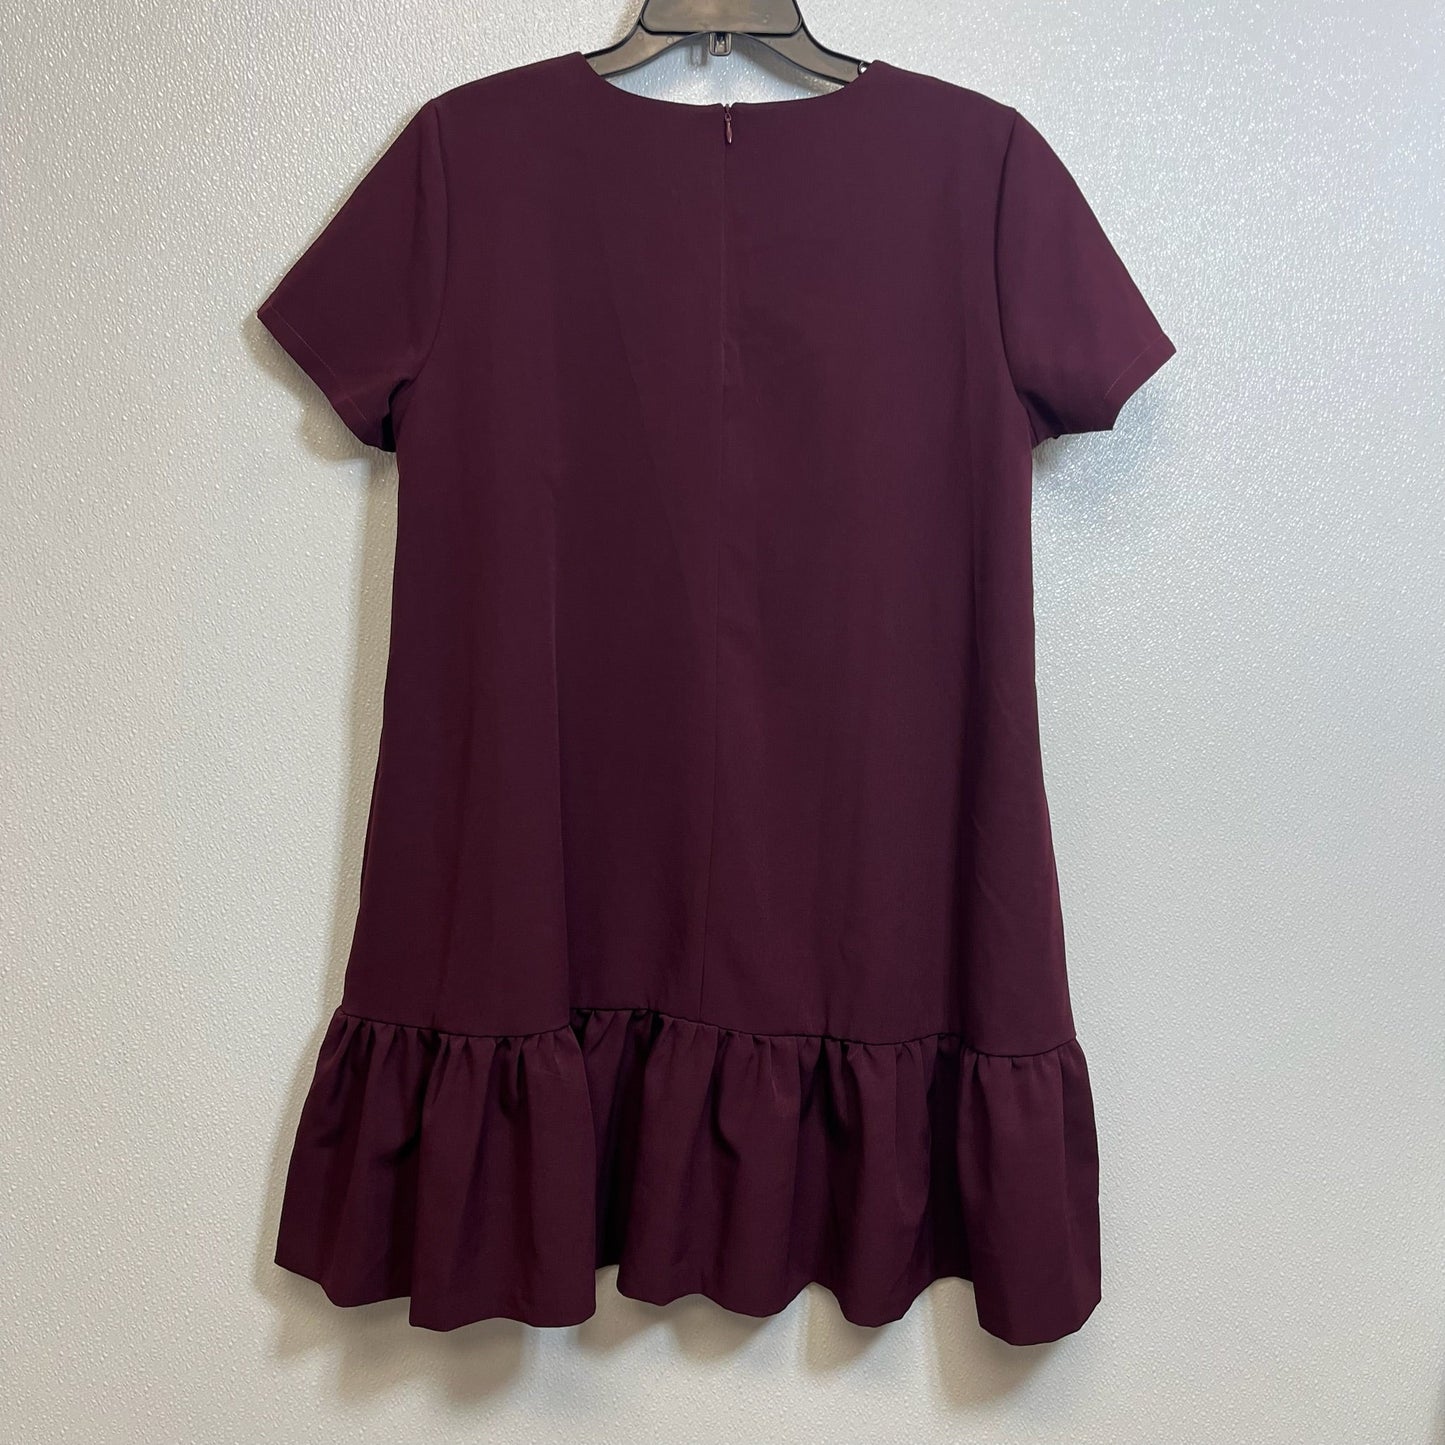 Burgundy Dress Casual Short Clothes Mentor, Size 2x